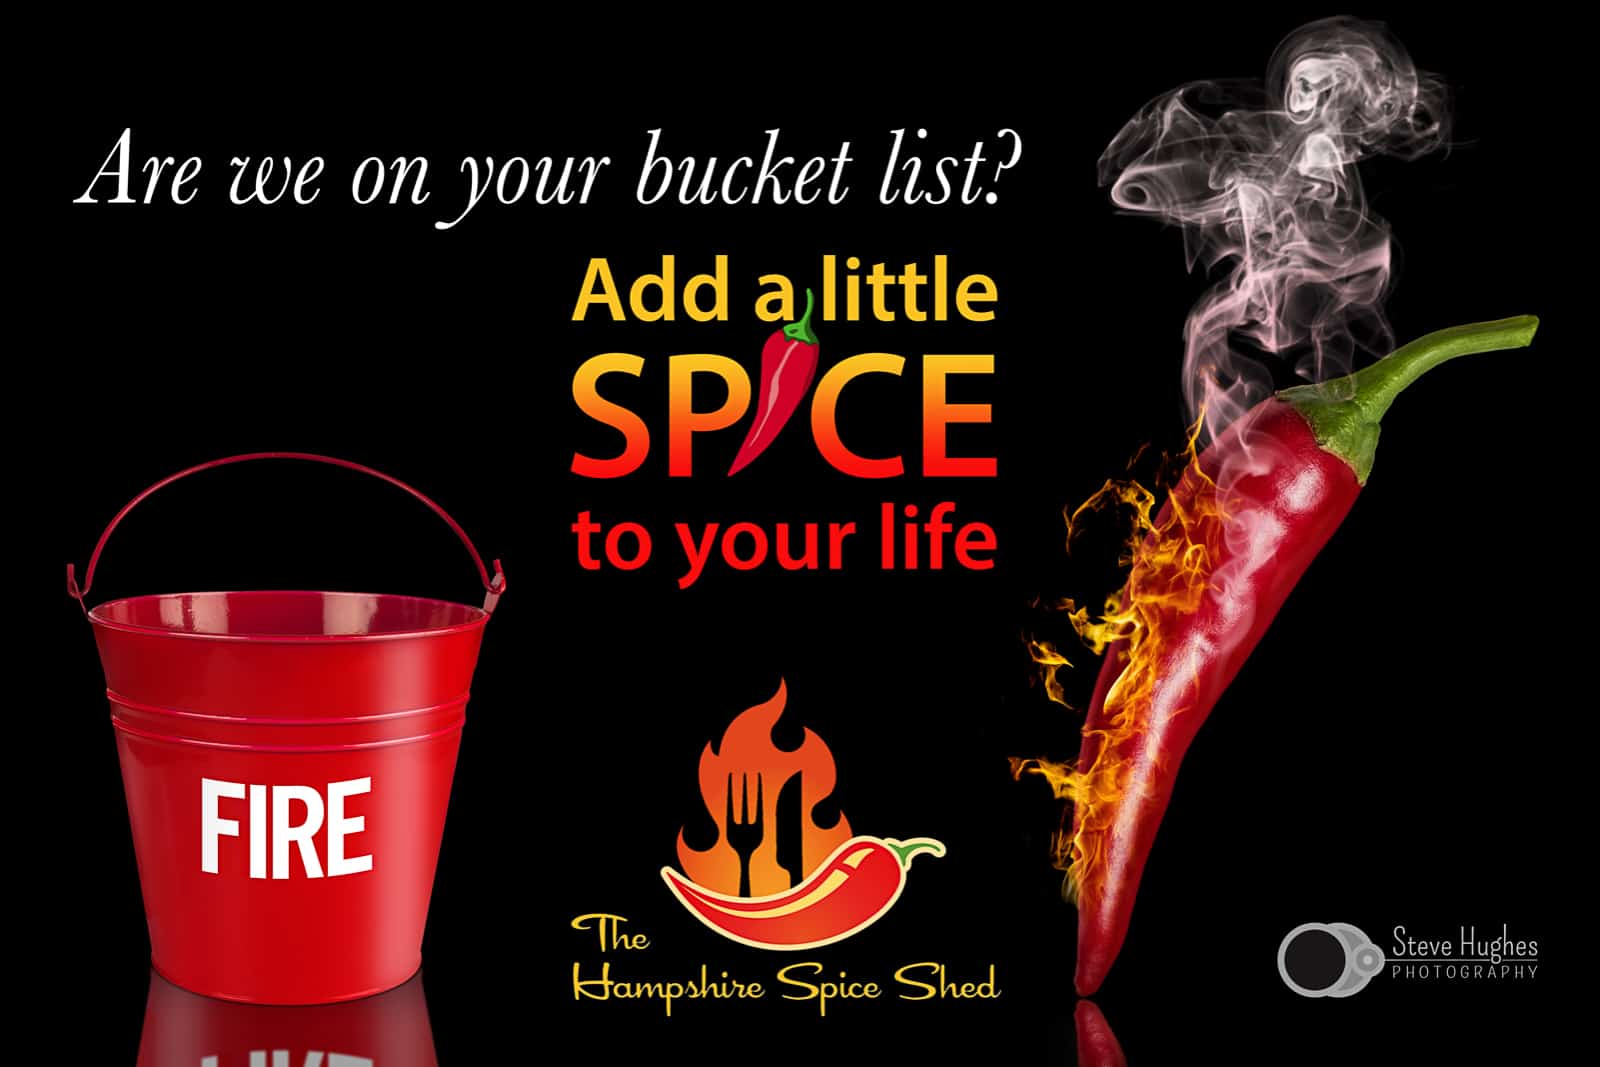 composite photograph of smoking red chillie pepper and red fire bucket on black background